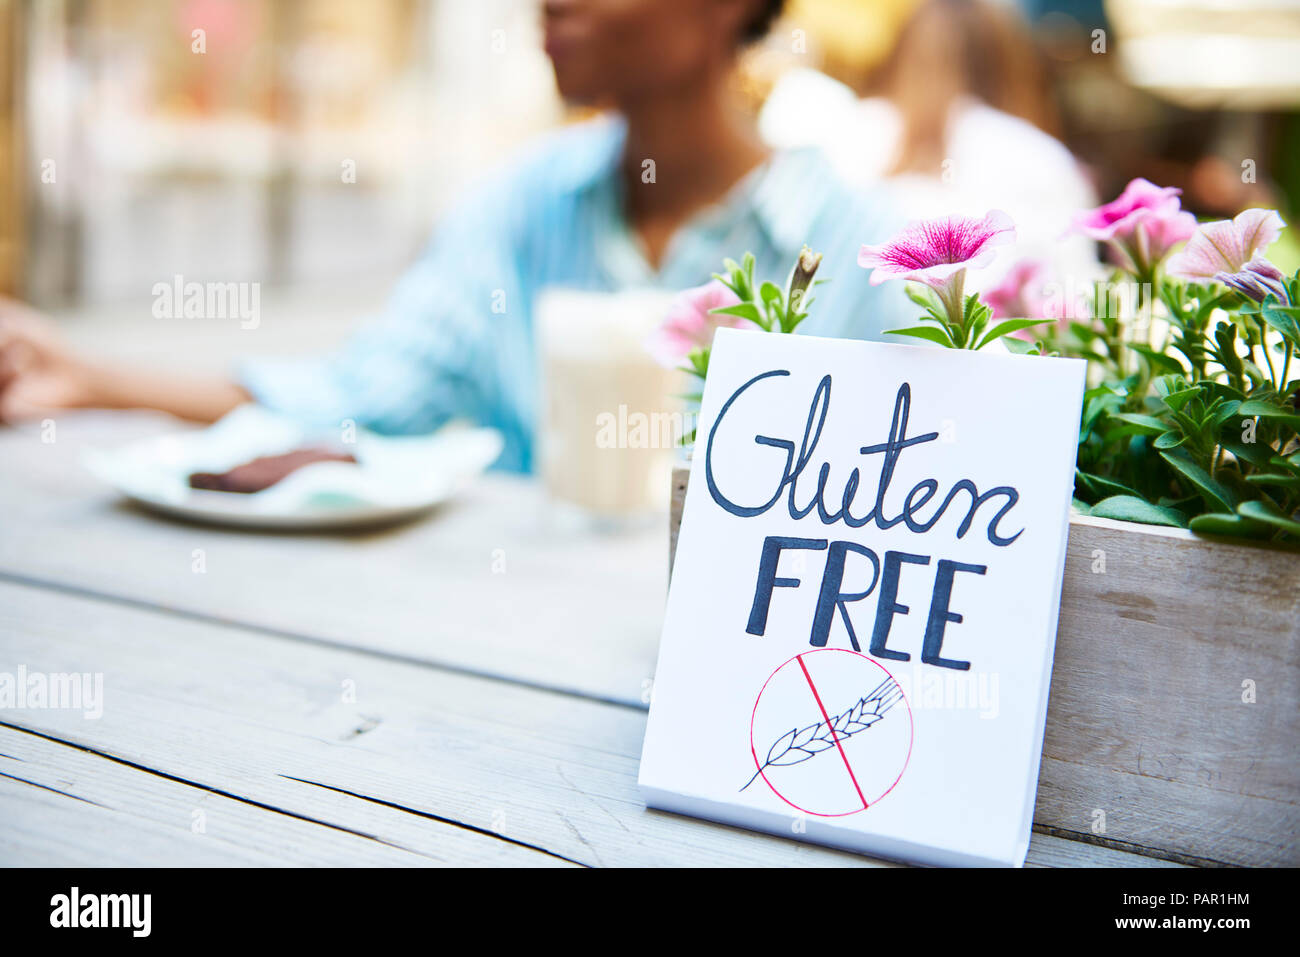 'Gluten free' sign at pavement cafe Stock Photo